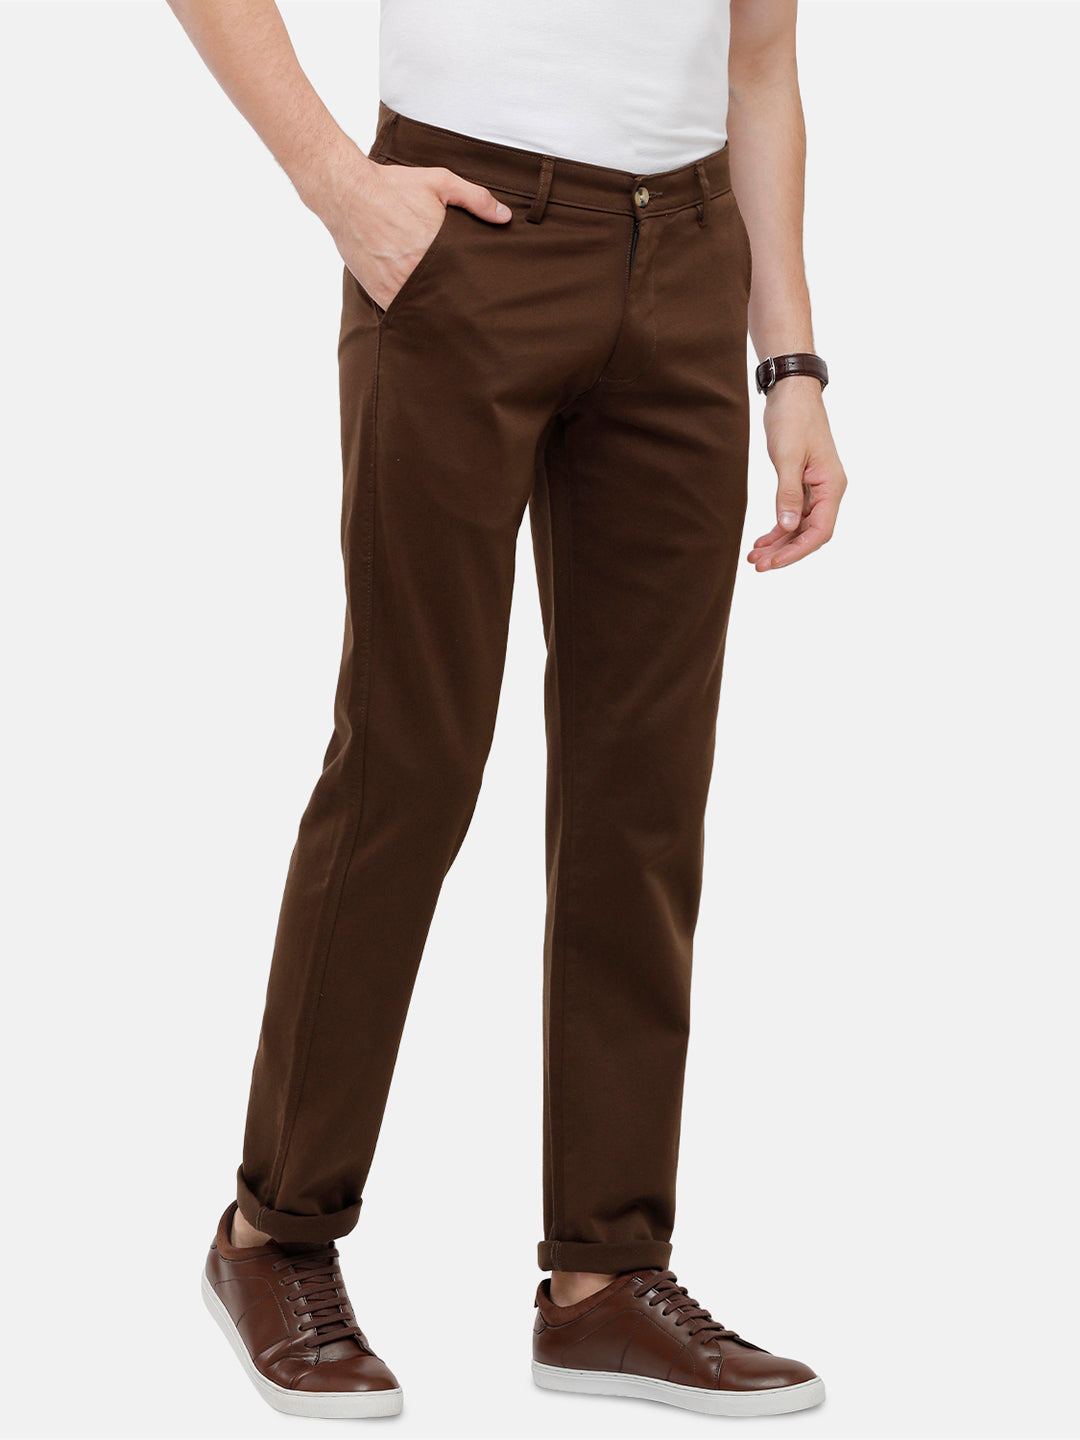 Discover 117+ brown formal trousers best